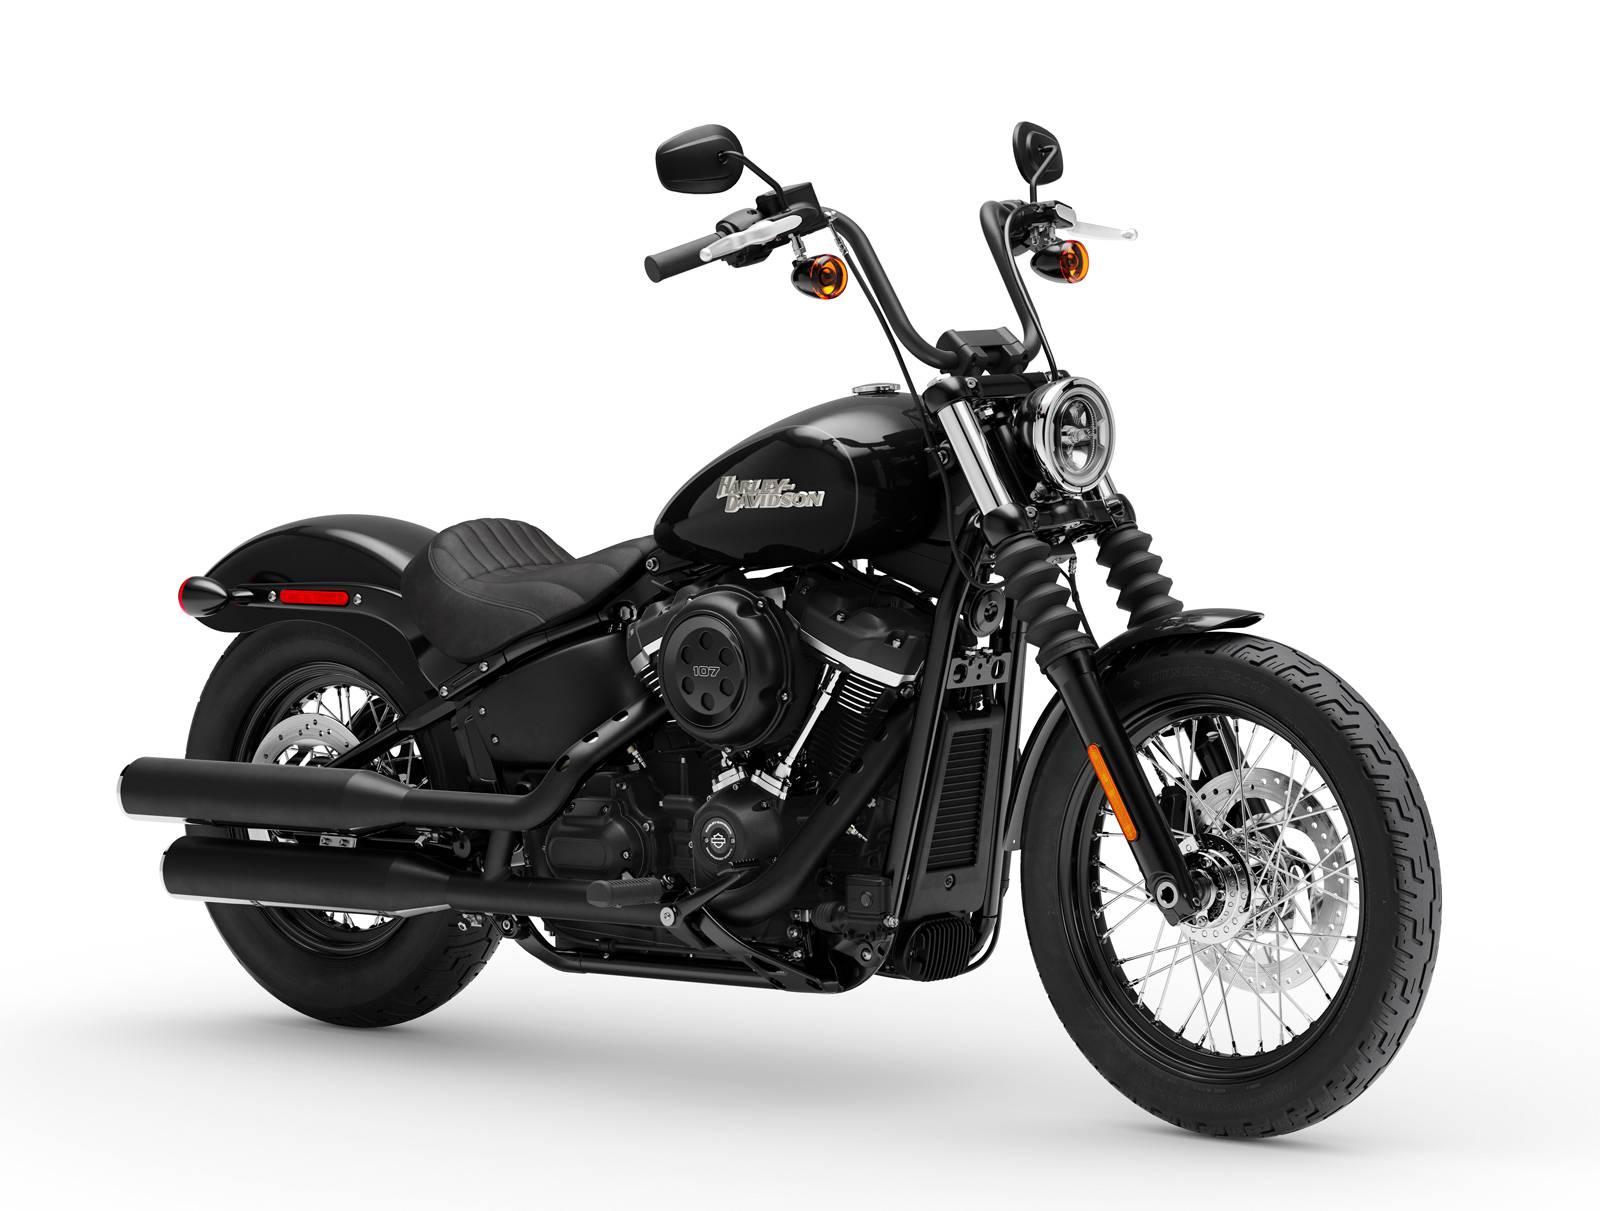 Harley-davidson softail street bob: detailed specs, background, performance, and more - viking bags